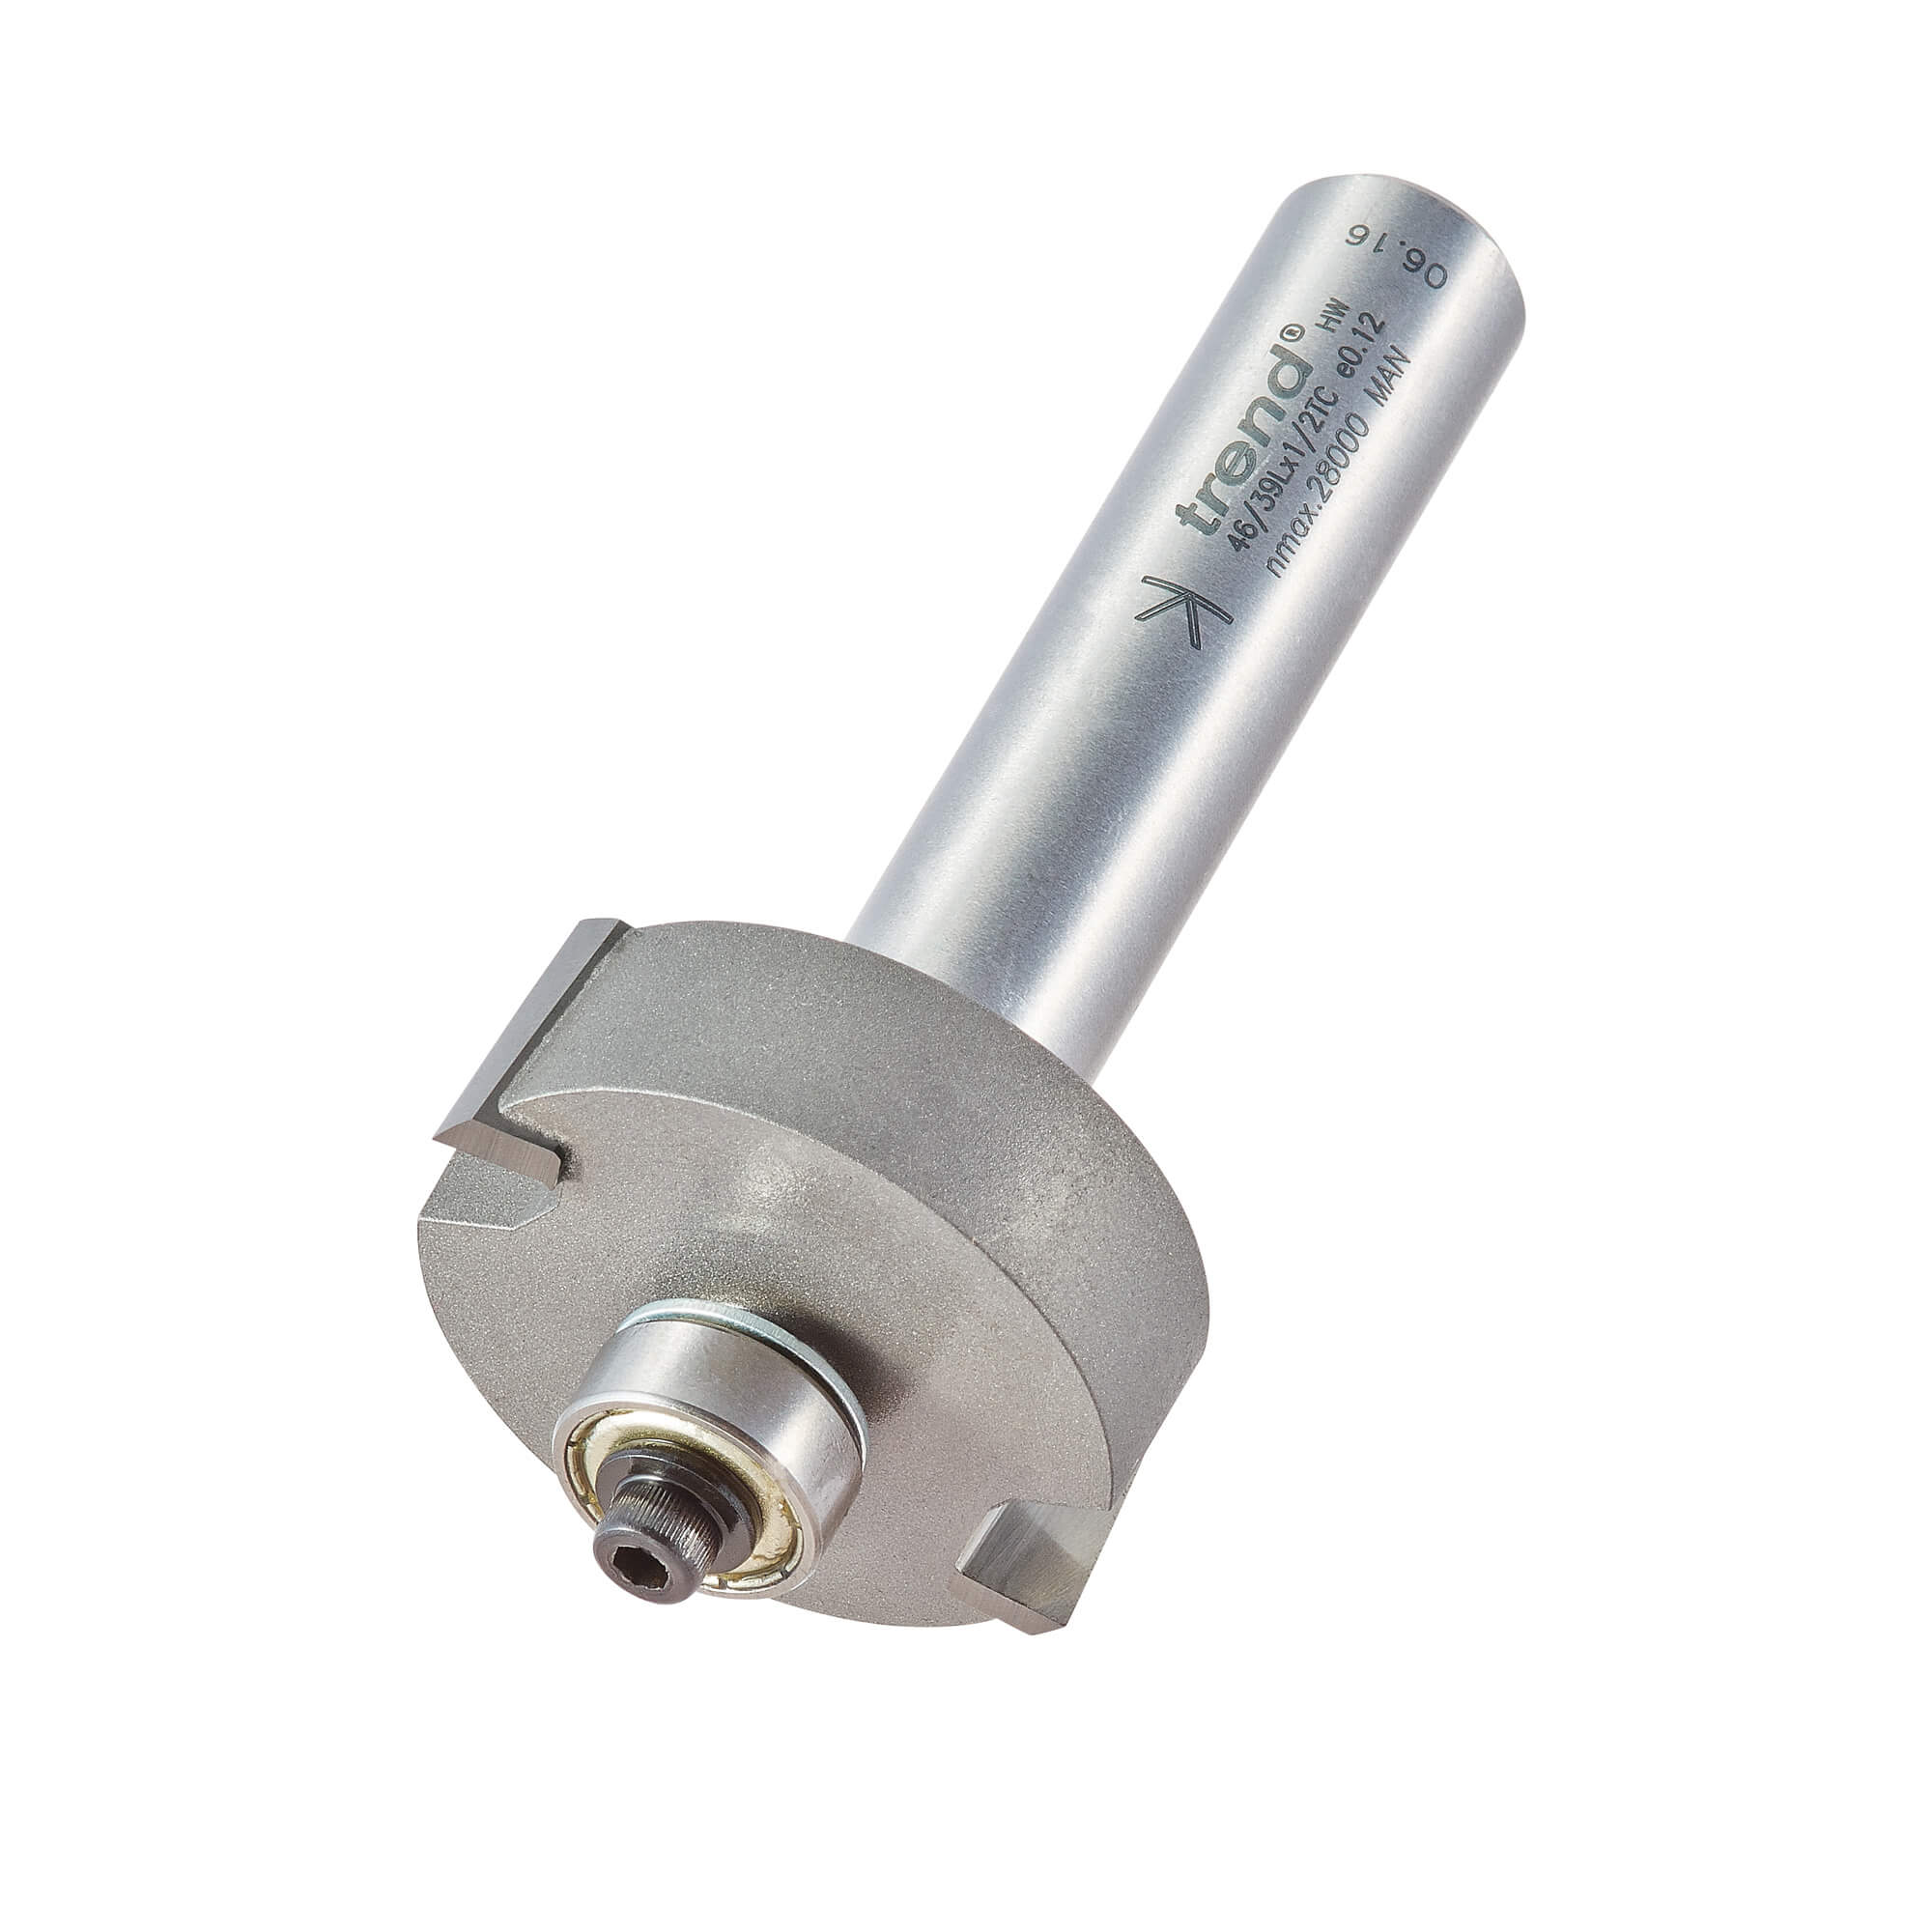 Image of Trend Bearing Guided Rebater Router Cutter 35mm 12.7mm 1/2"